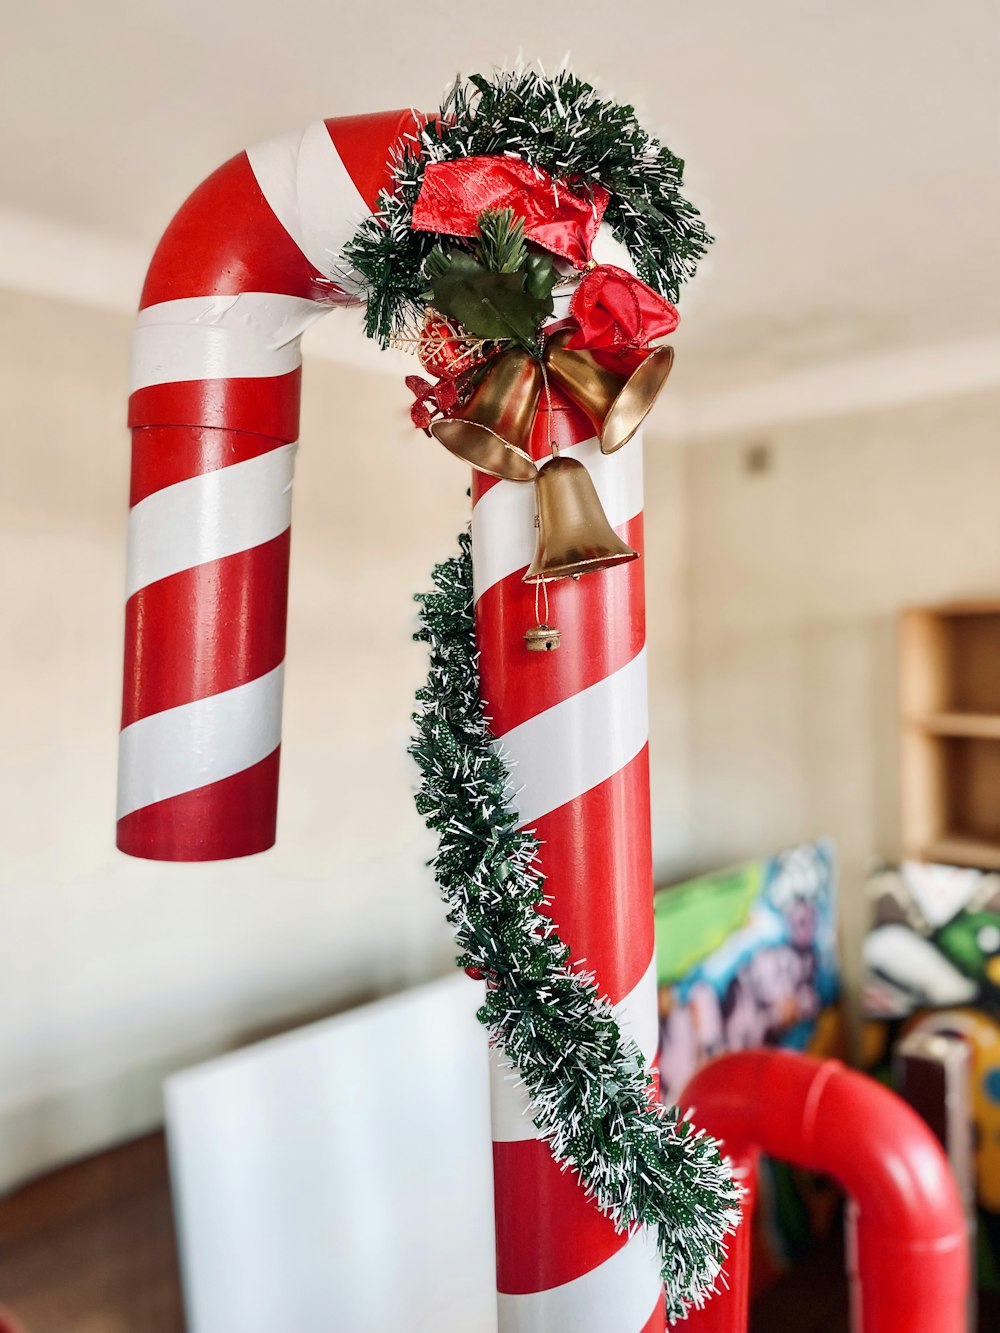 a red and white candy cane decorated with a wreath